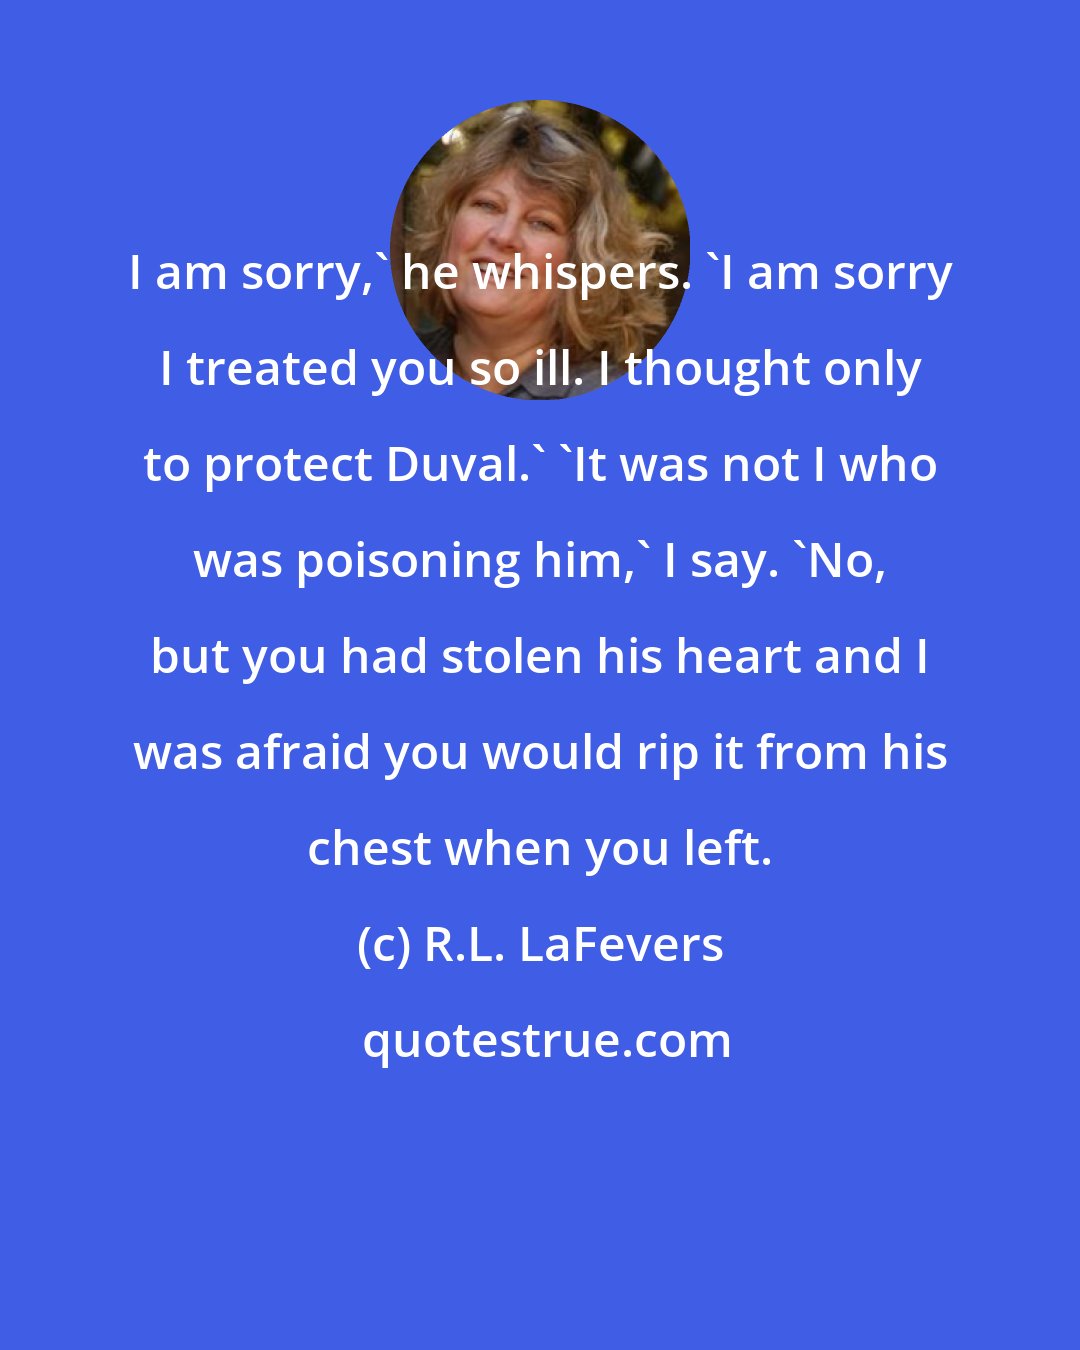 R.L. LaFevers: I am sorry,' he whispers. 'I am sorry I treated you so ill. I thought only to protect Duval.' 'It was not I who was poisoning him,' I say. 'No, but you had stolen his heart and I was afraid you would rip it from his chest when you left.